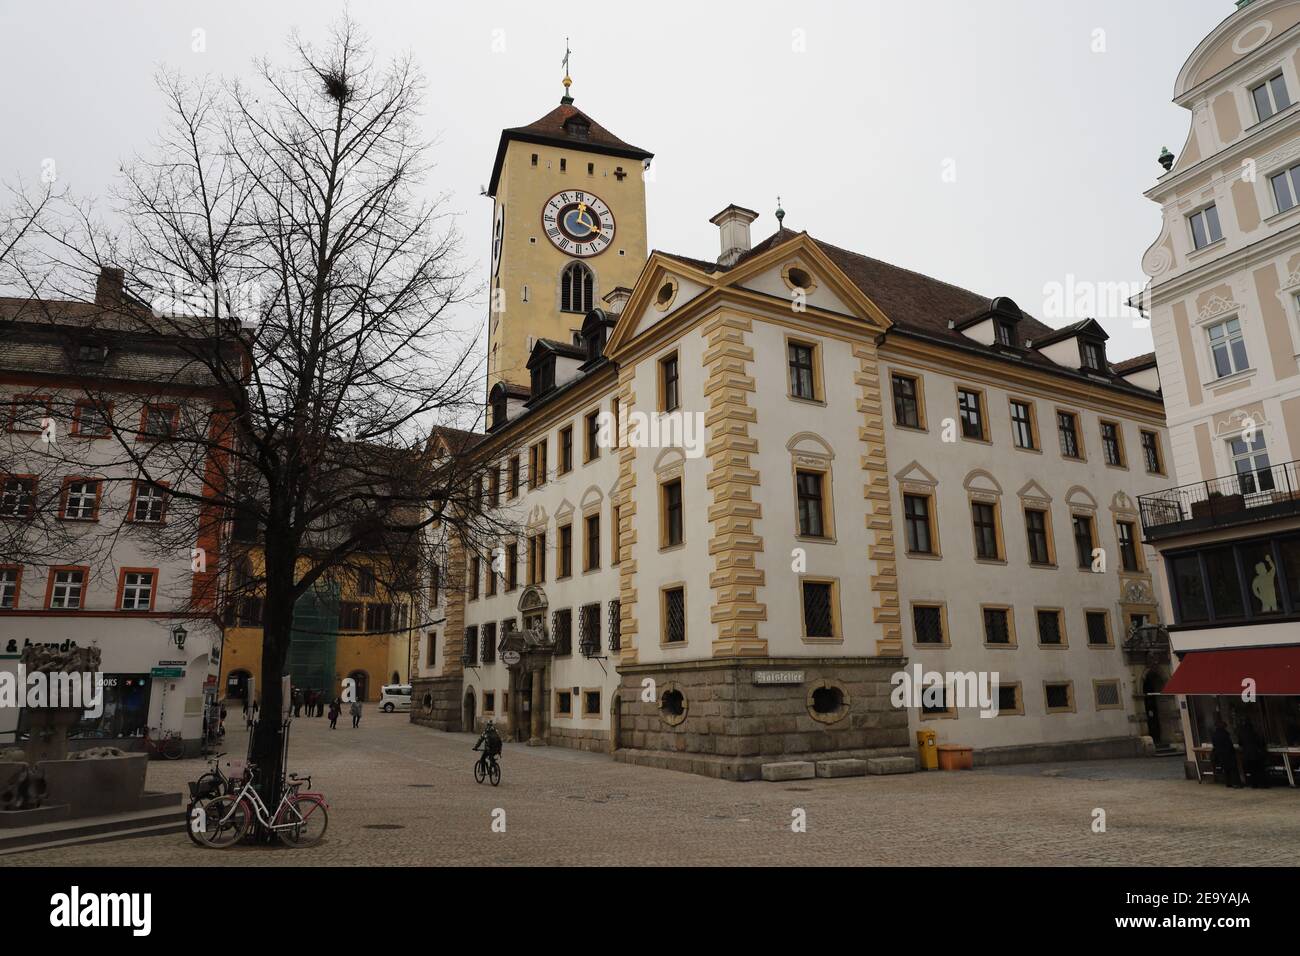 GERMANY, REGENSBURG, FEBRUARY 01, 2019: Kohlenmarkt with Old Town Hall Tower and Ratskeller Stock Photo